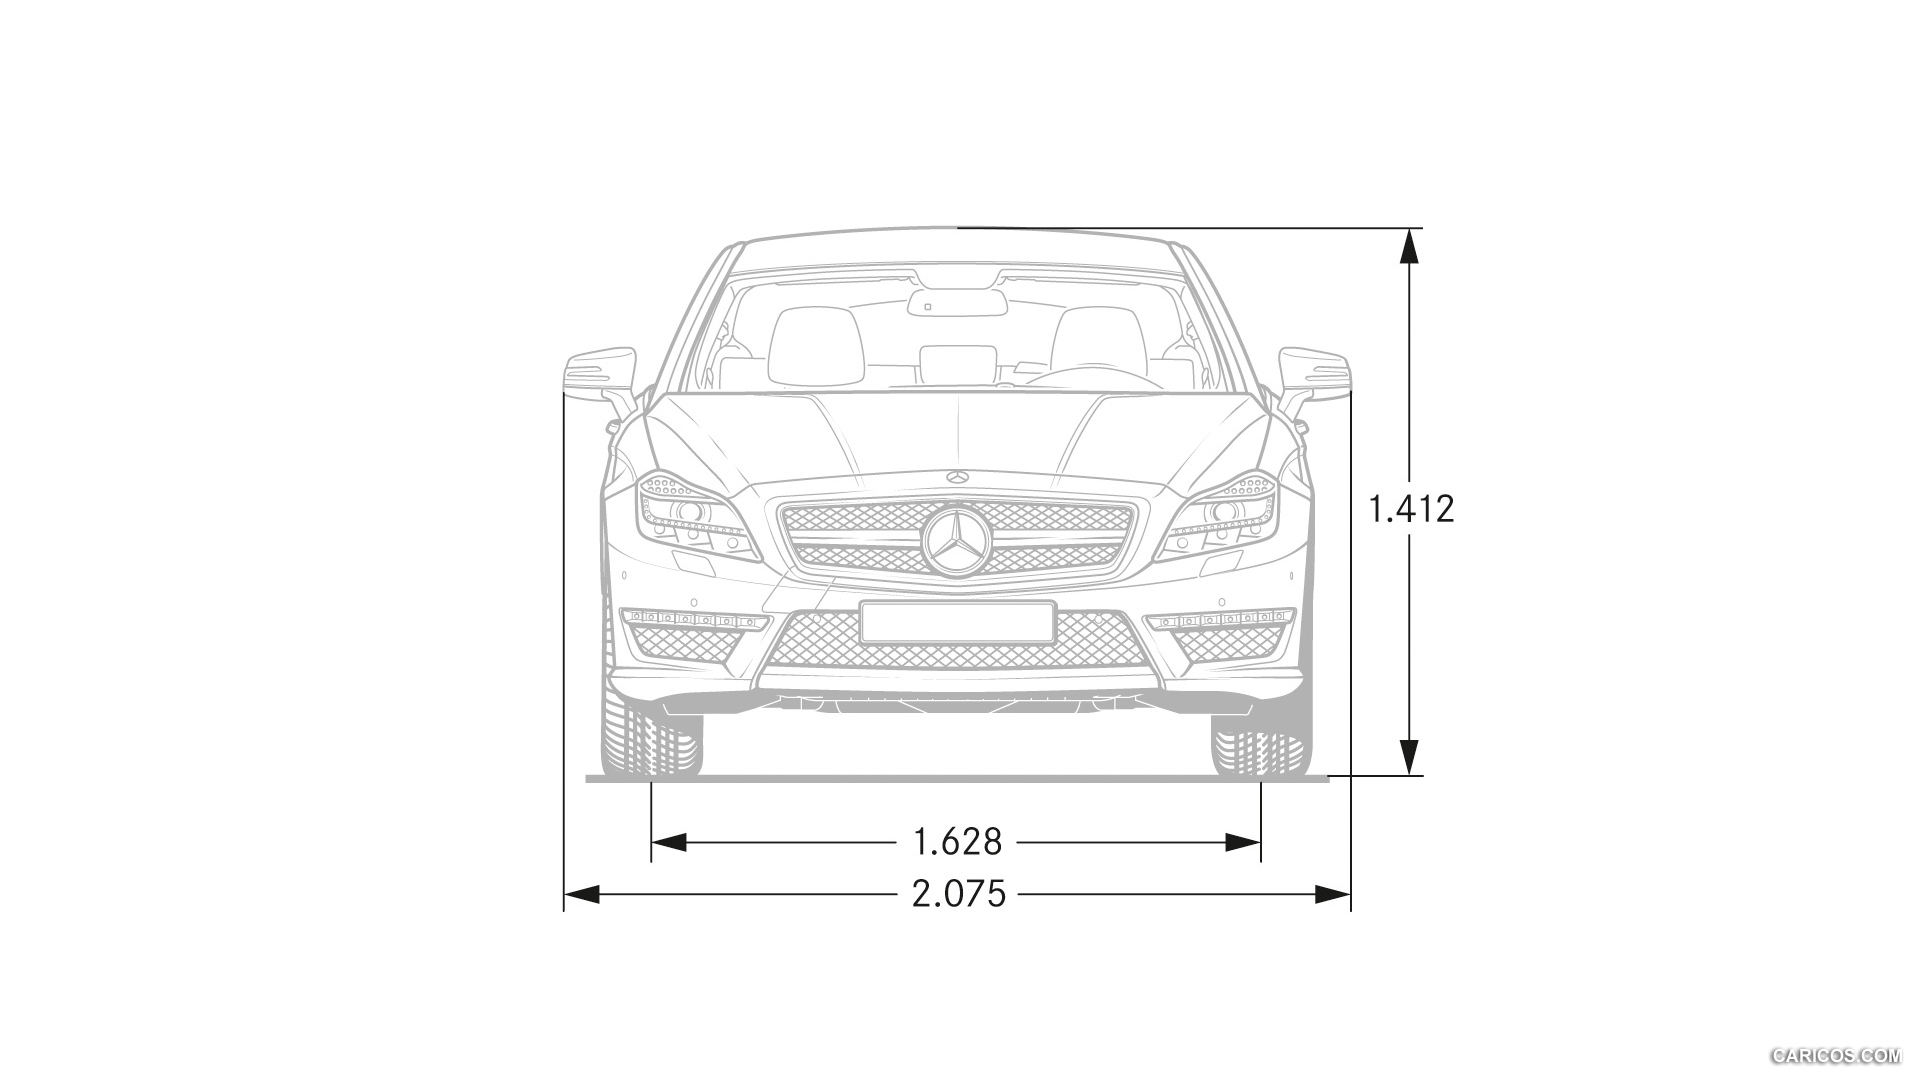 2013 Mercedes-Benz CLS 63 AMG Shooting Brake Dimensions - , #32 of 35